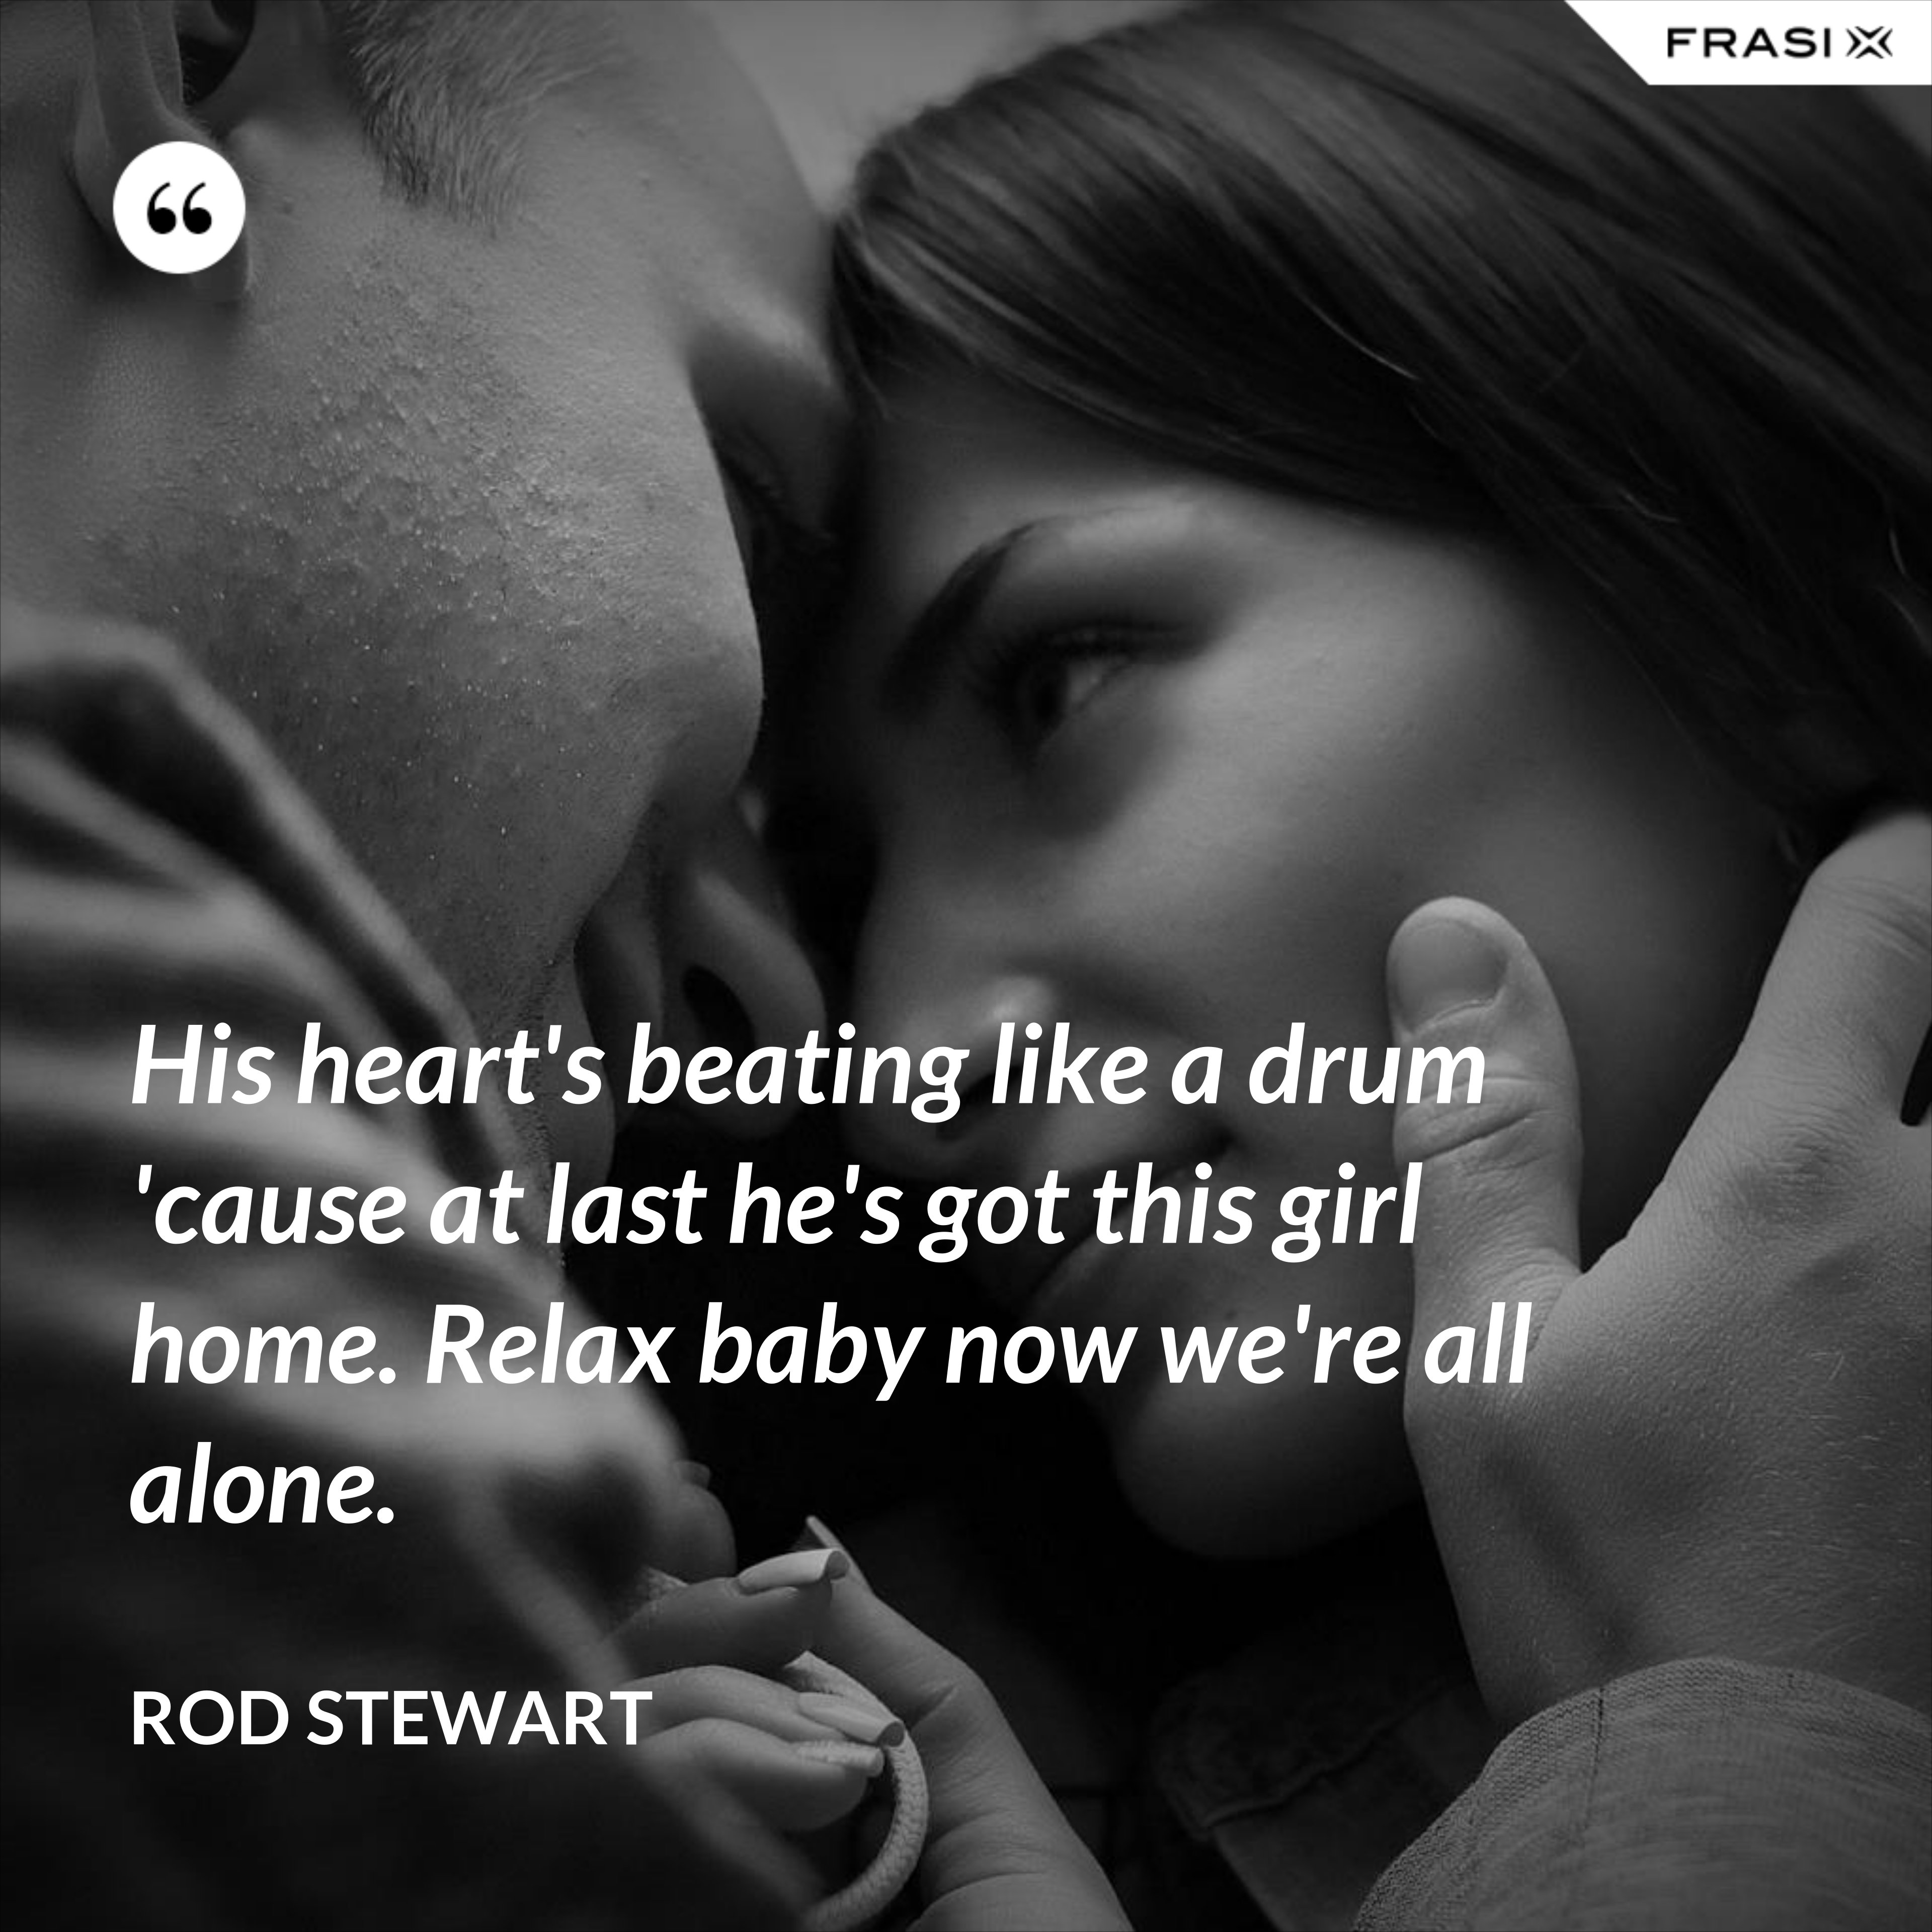 His heart's beating like a drum 'cause at last he's got this girl home. Relax baby now we're all alone. - Rod Stewart